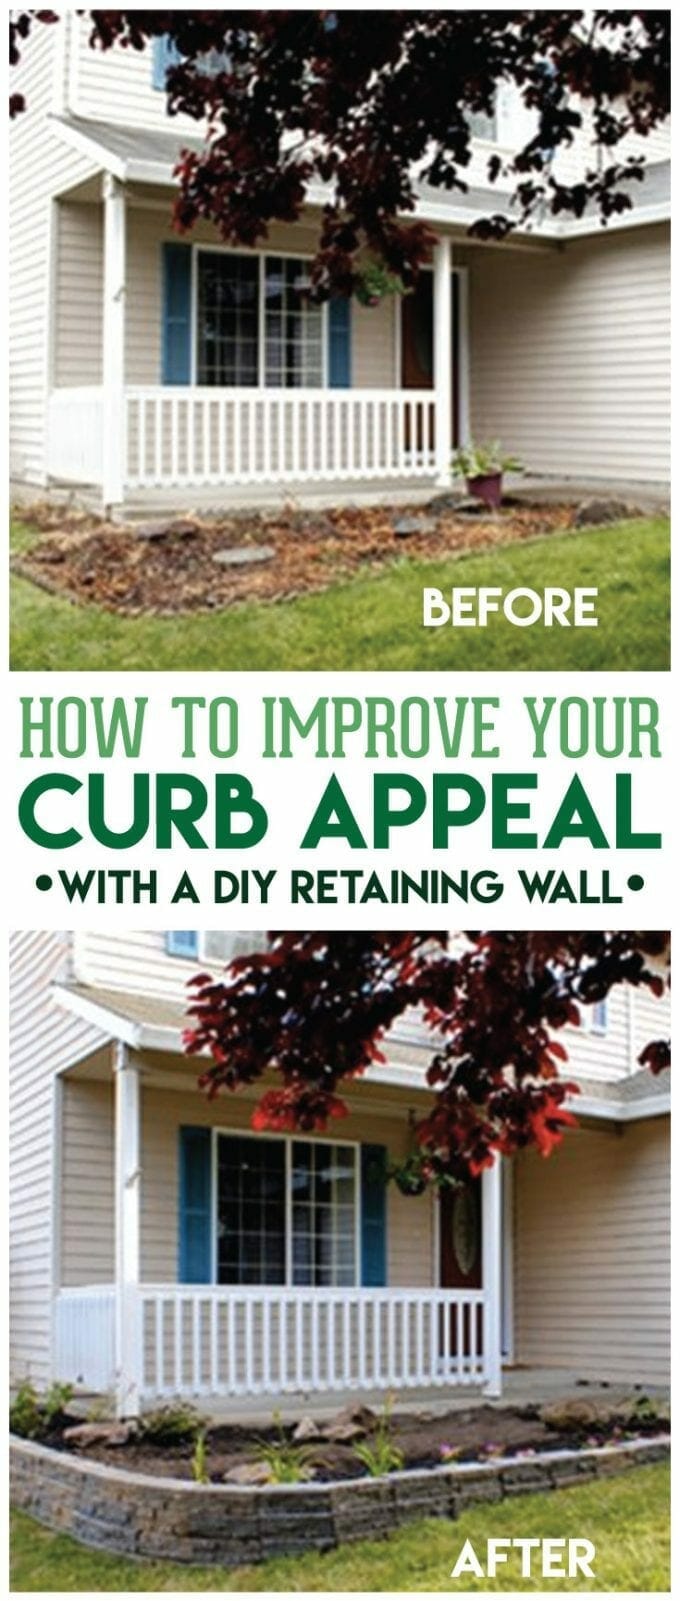 How to improve your curb appeal